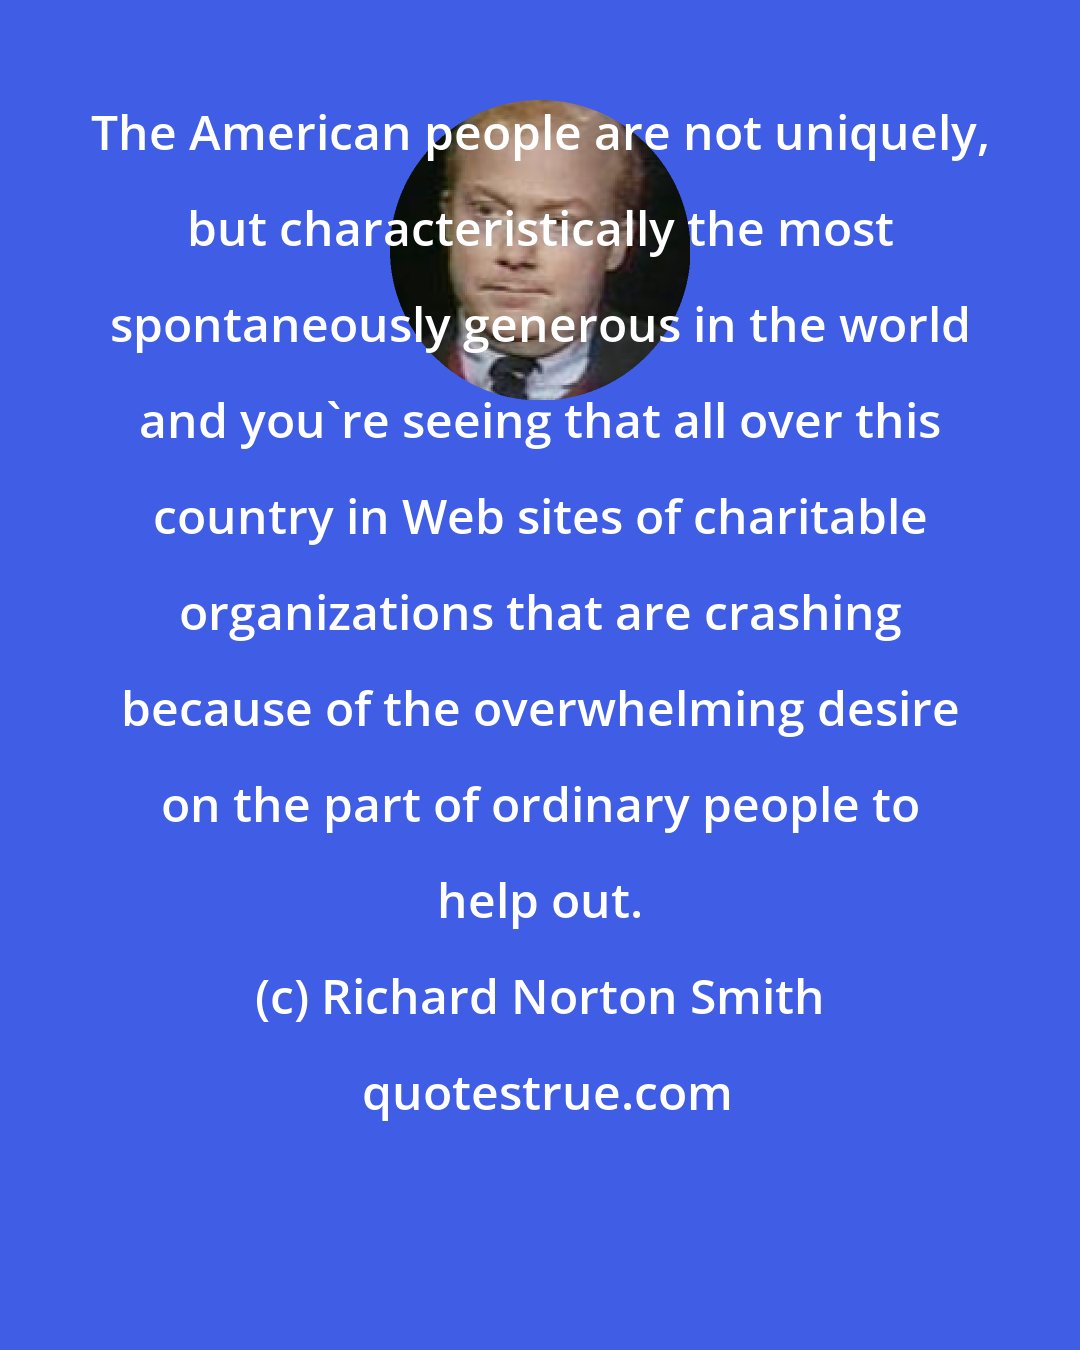 Richard Norton Smith: The American people are not uniquely, but characteristically the most spontaneously generous in the world and you're seeing that all over this country in Web sites of charitable organizations that are crashing because of the overwhelming desire on the part of ordinary people to help out.